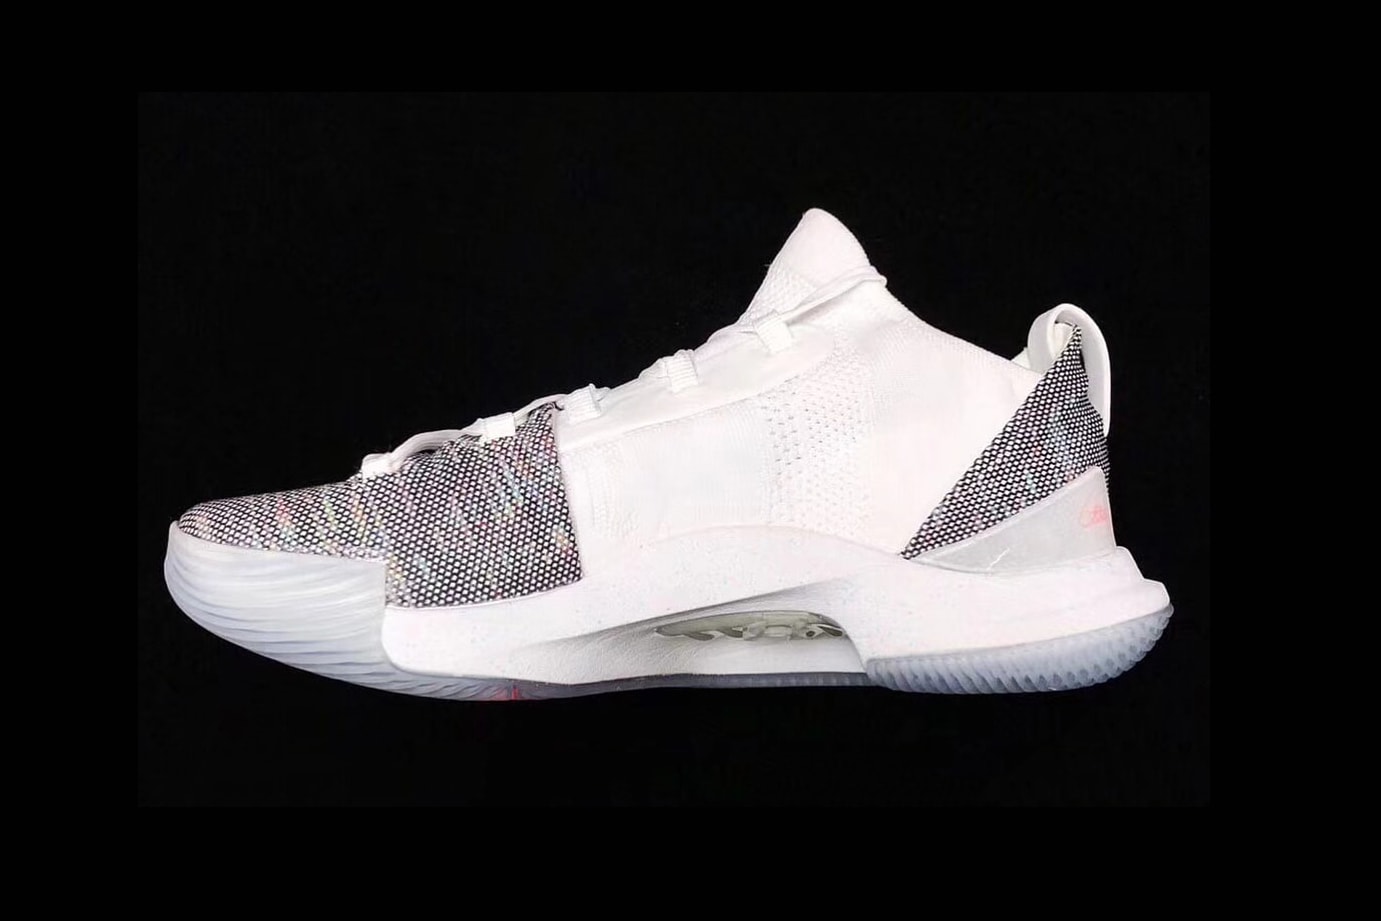 Under Armour Curry 5 最新諜照曝光